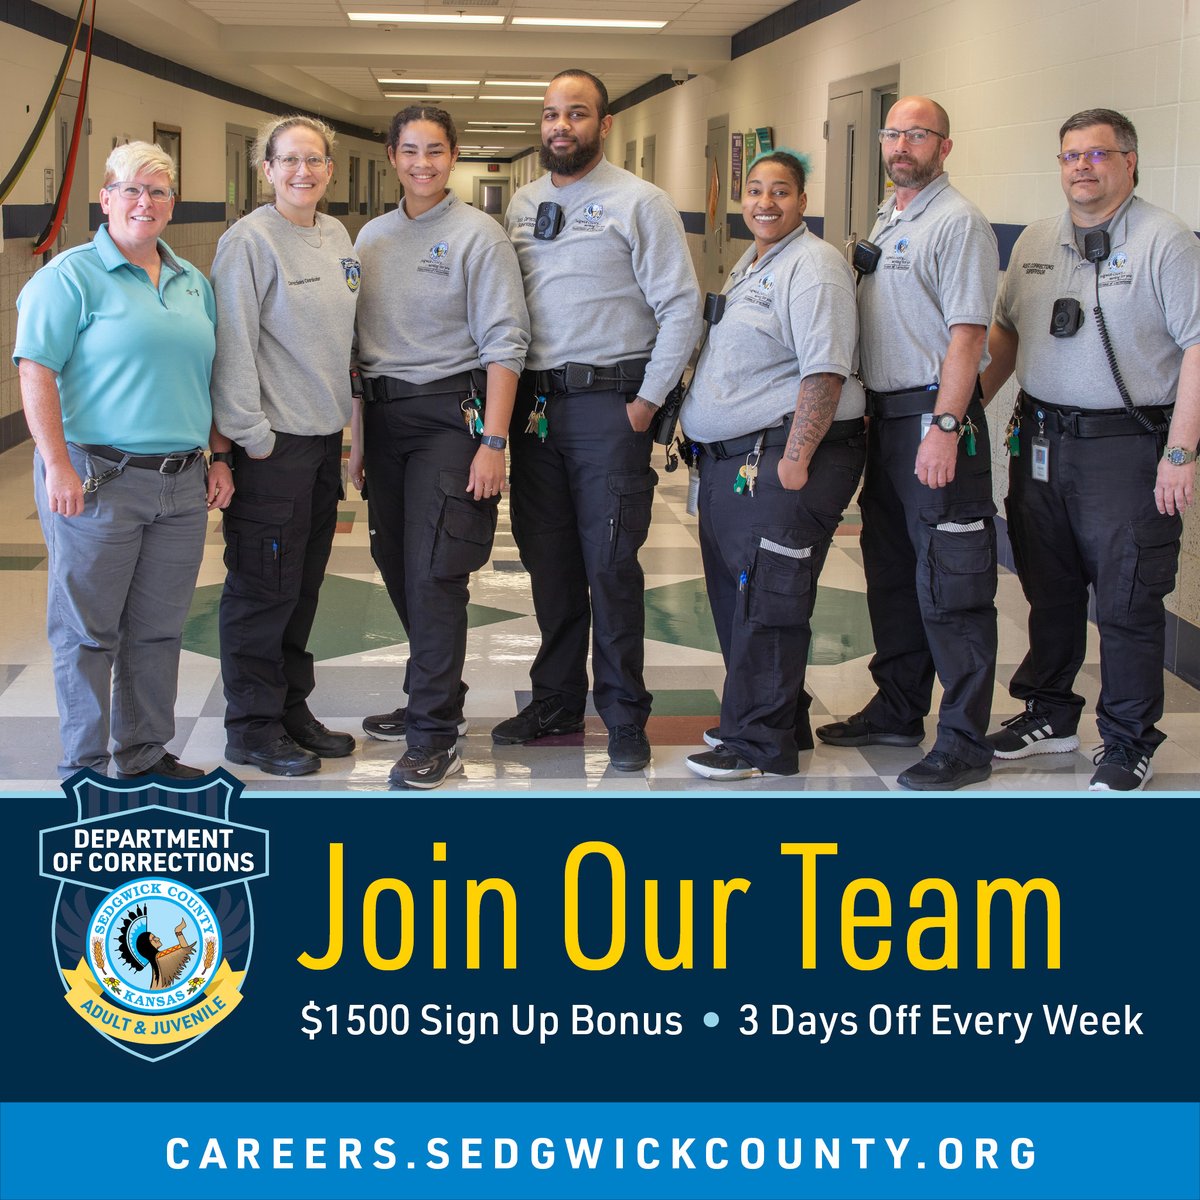 Join our team at Sedgwick County Corrections as an Intake and Assessment Officer! You'll handle intake and assessment procedures for clients at JIAC. This rewarding career path offers opportunities for case management and supervisor extender. To apply: careers.sedgwickcounty.org/job/Wichita-Co….